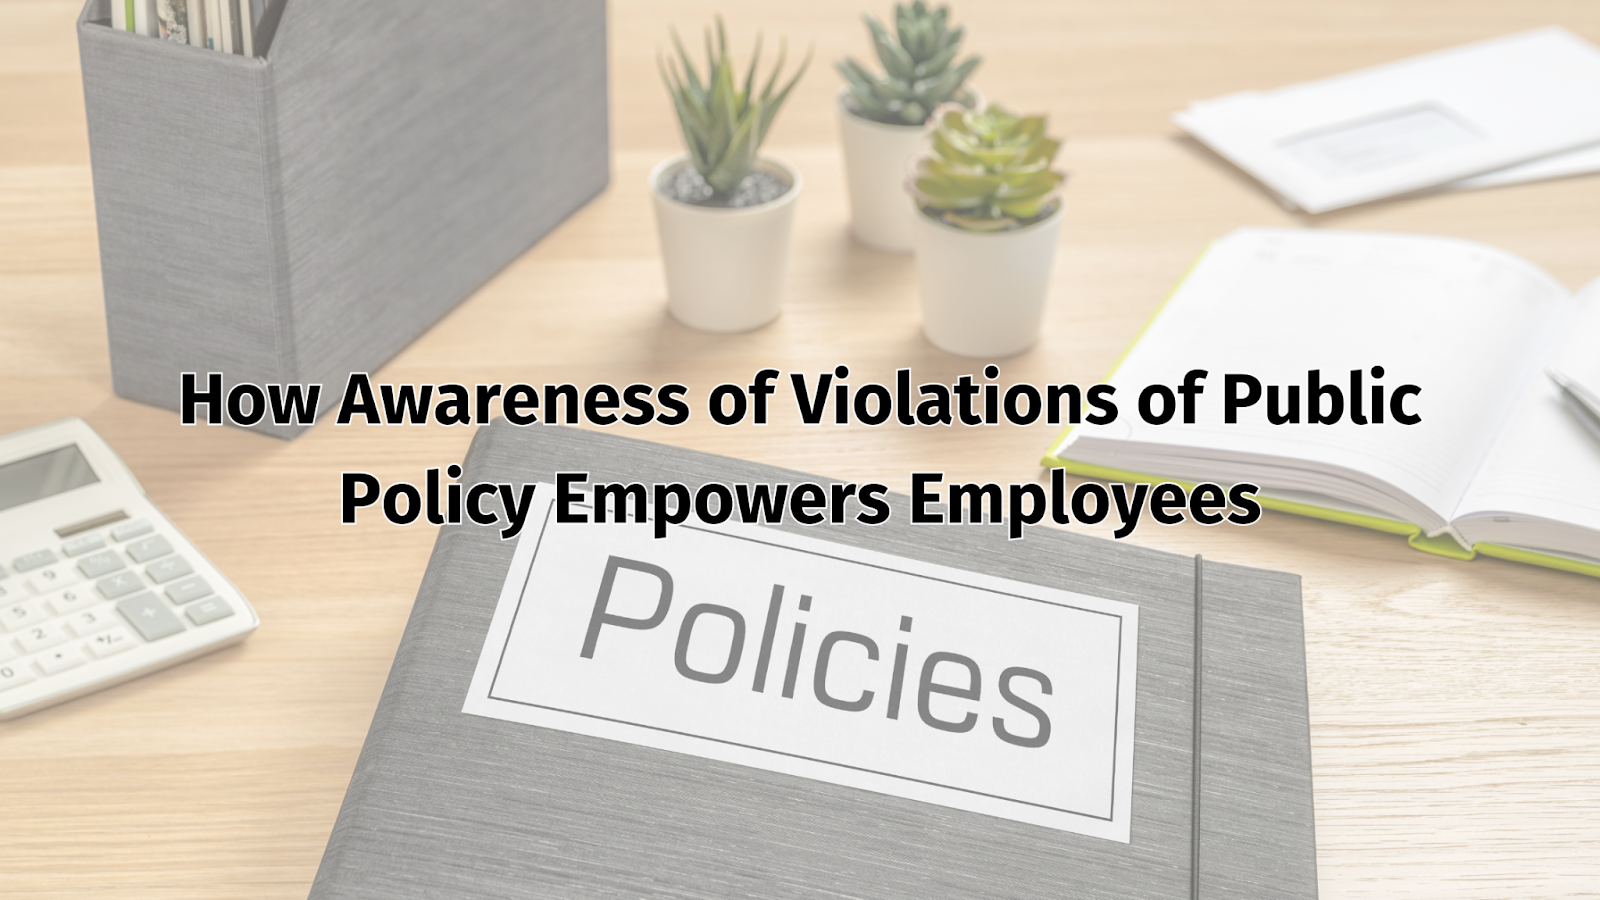 How Awareness of Violations of Public Policy Empowers Employees